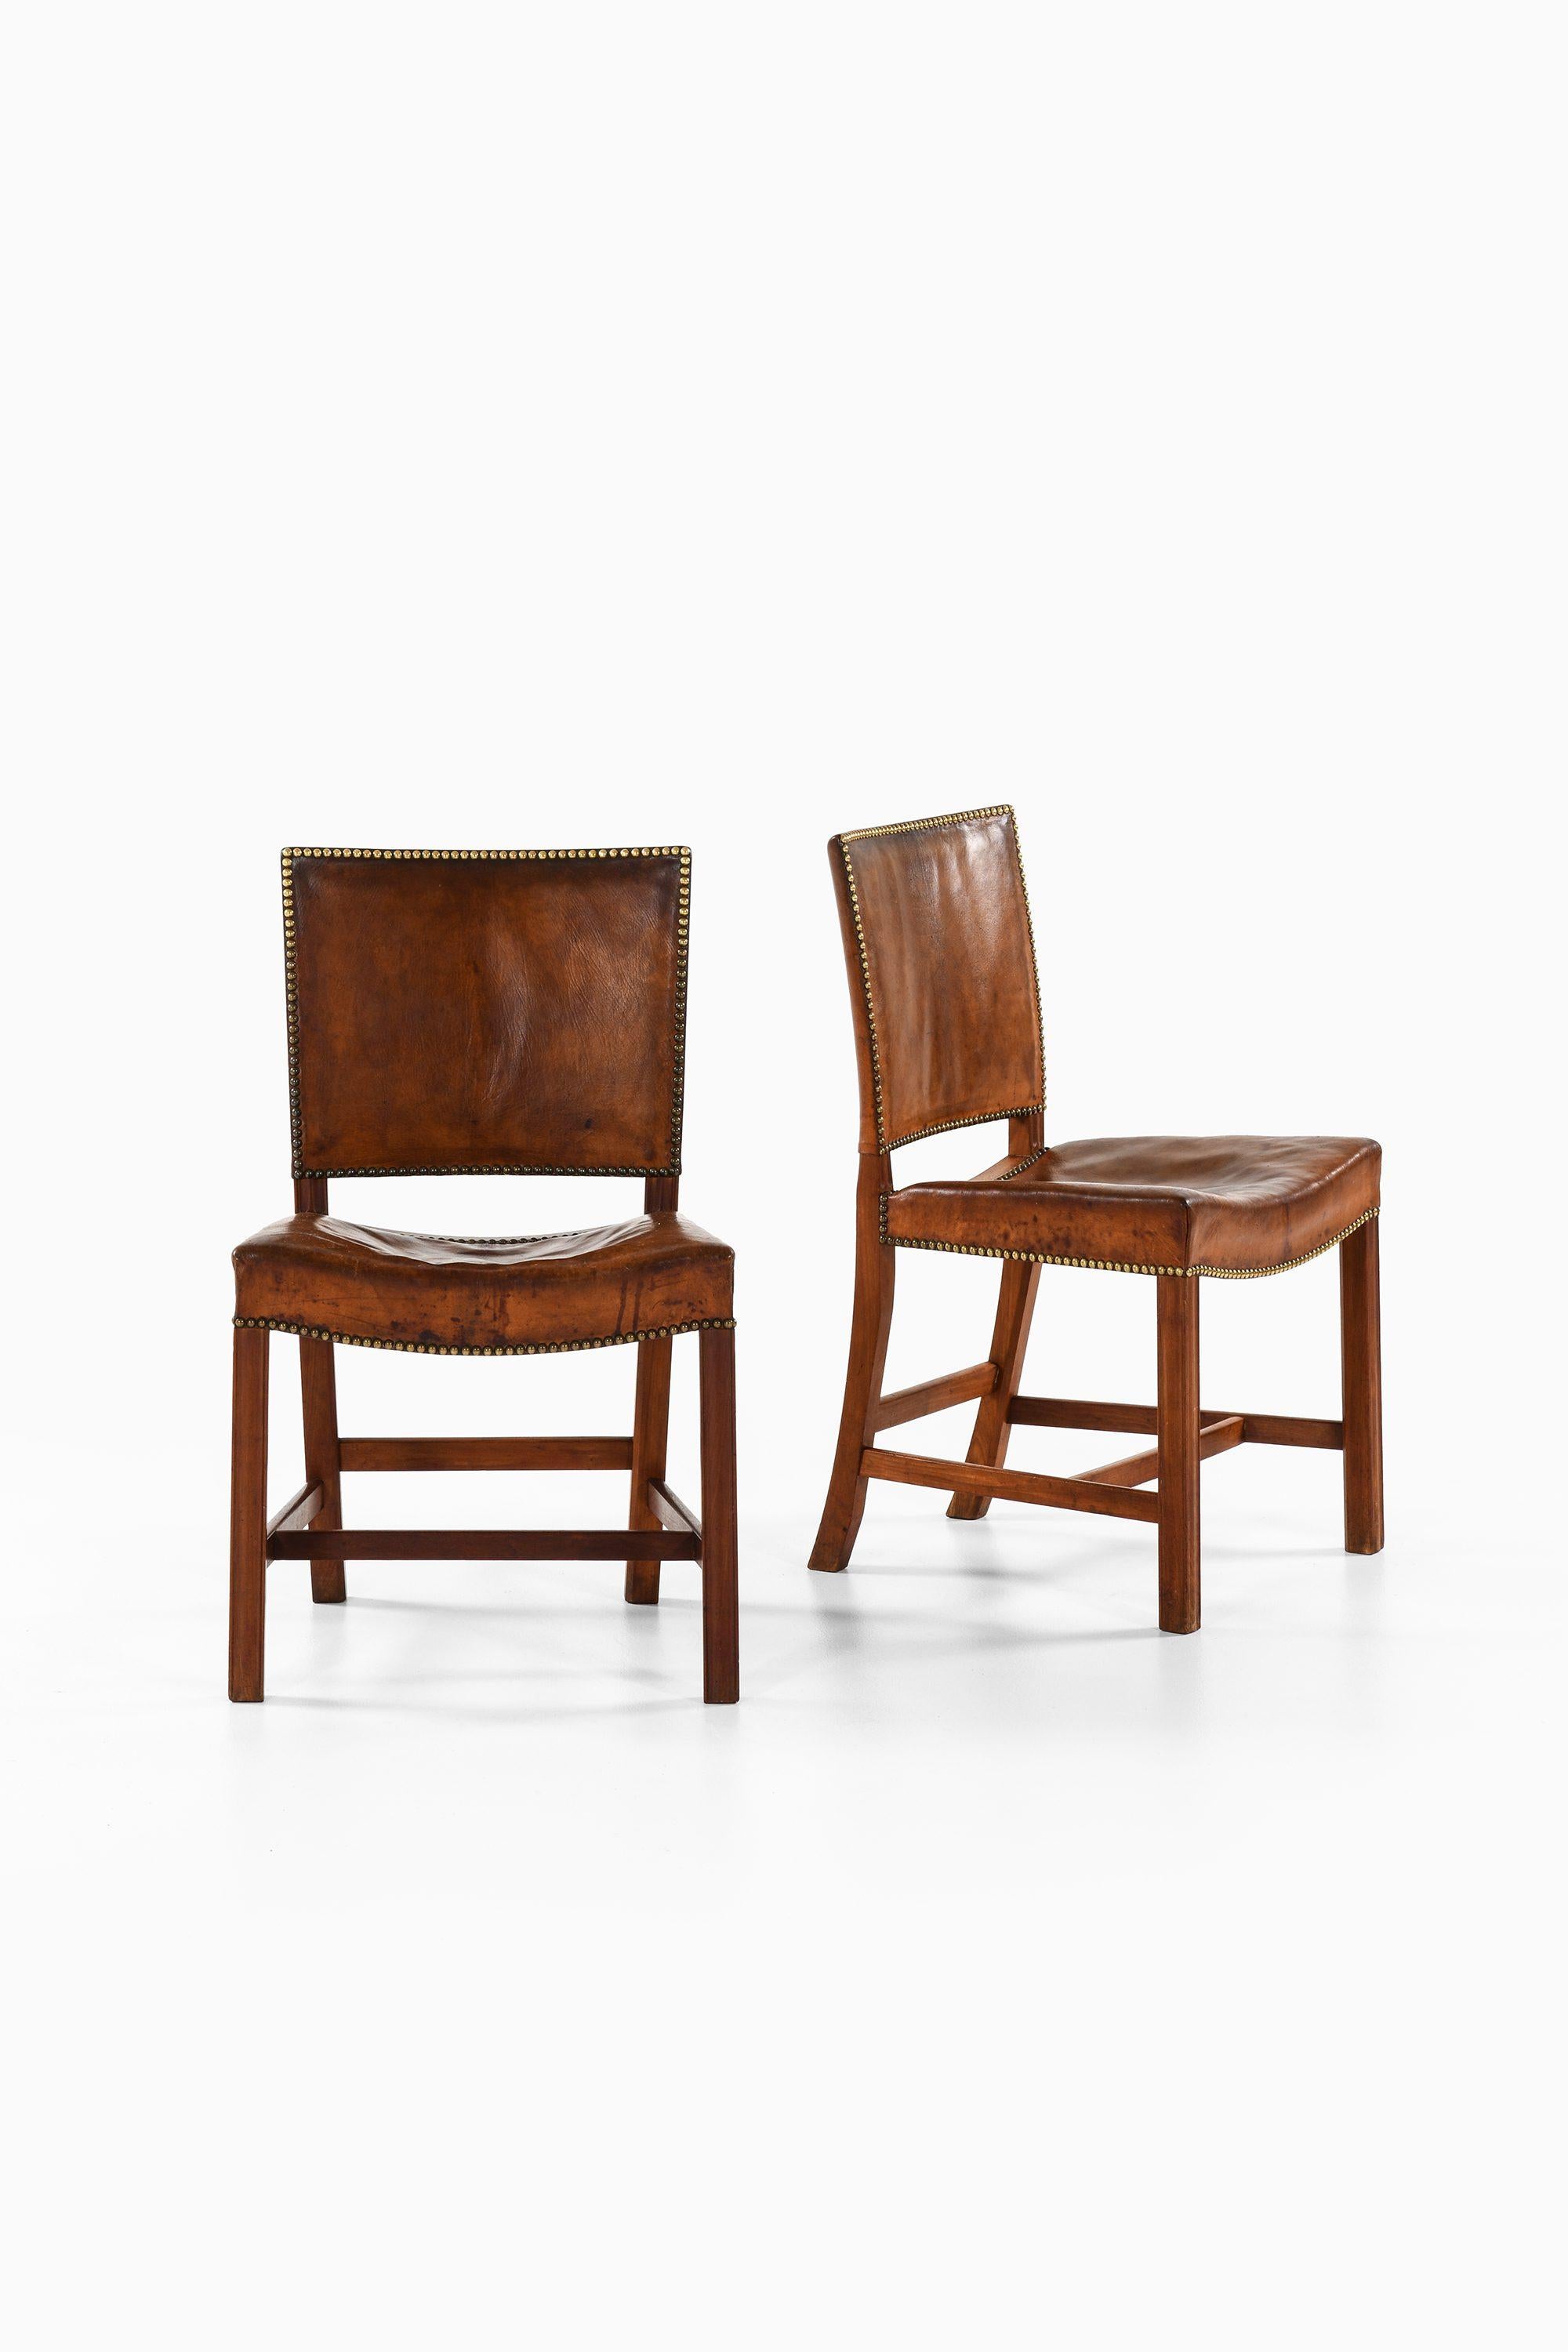 Set of 4 Chairs in Mahogany and Leather by Kaare Klint Dining, 1930s

Additional Information:
Material: Cuban mahogany and niger leather with brass rivets
Style: midcentury, Scandinavian
Rare set of 4 dining chairs model 4751
Produced by Rud.